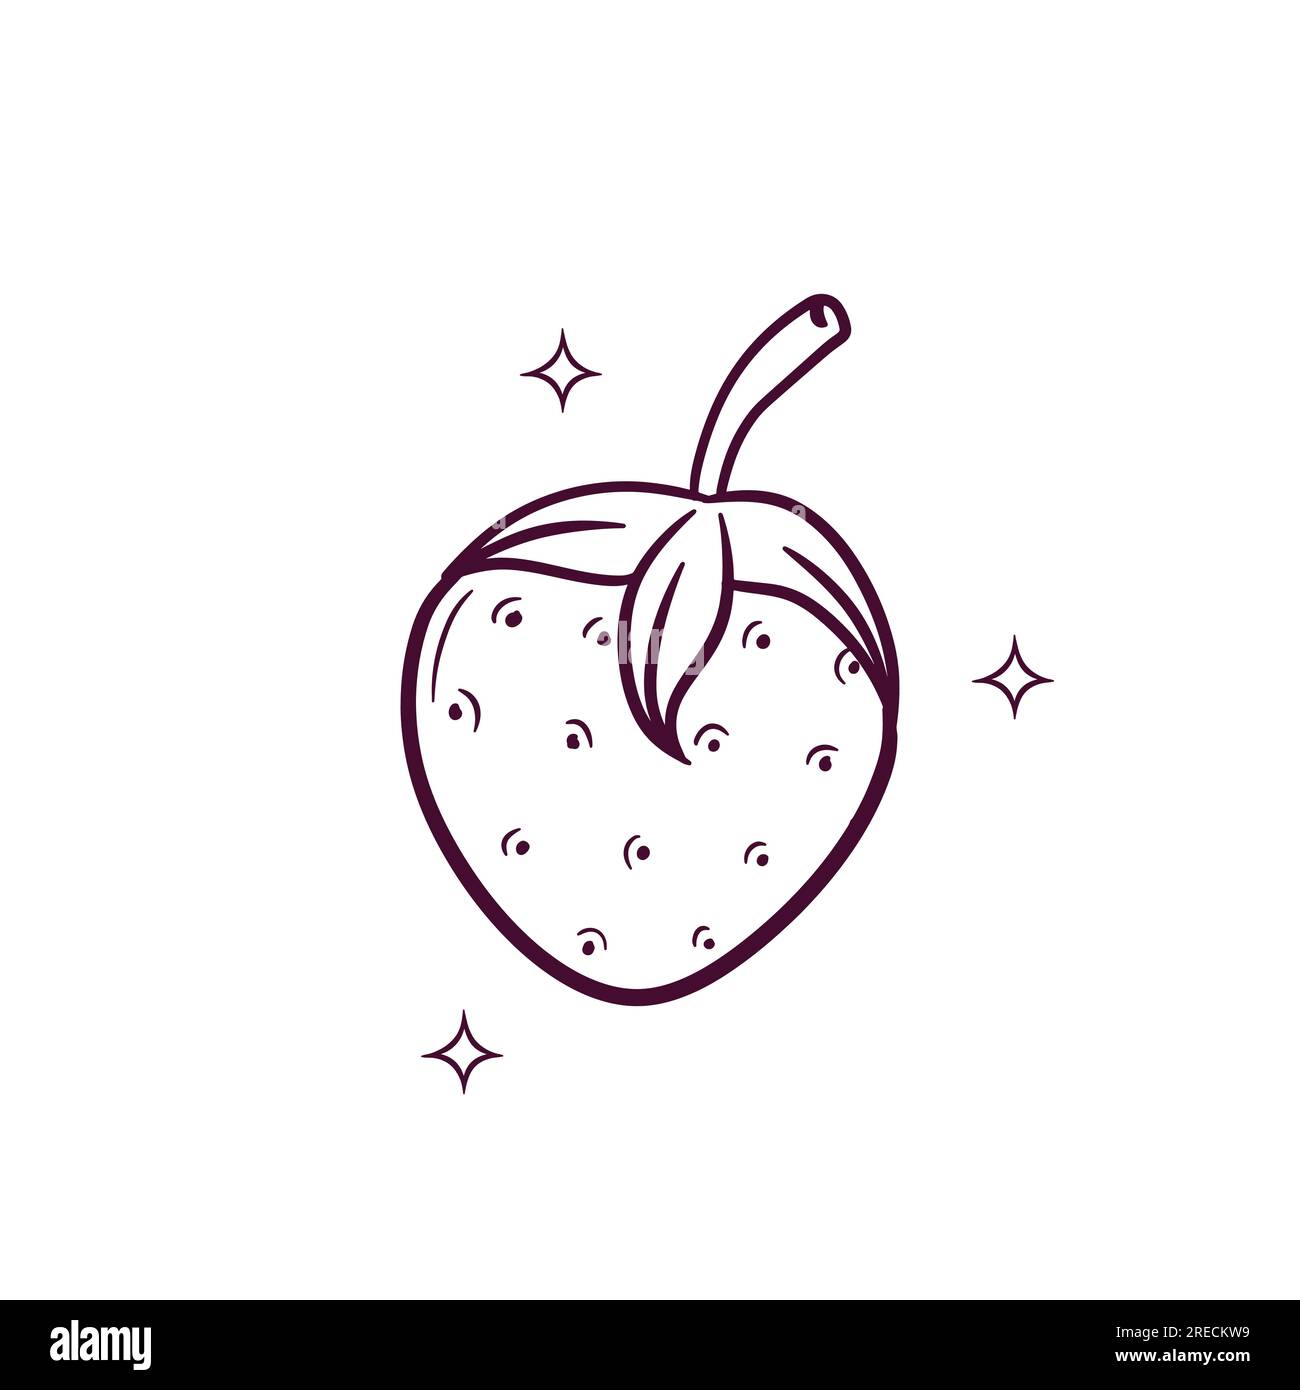 Hand Drawn Strawberry. Doodle Vector Sketch Illustration Stock Vector